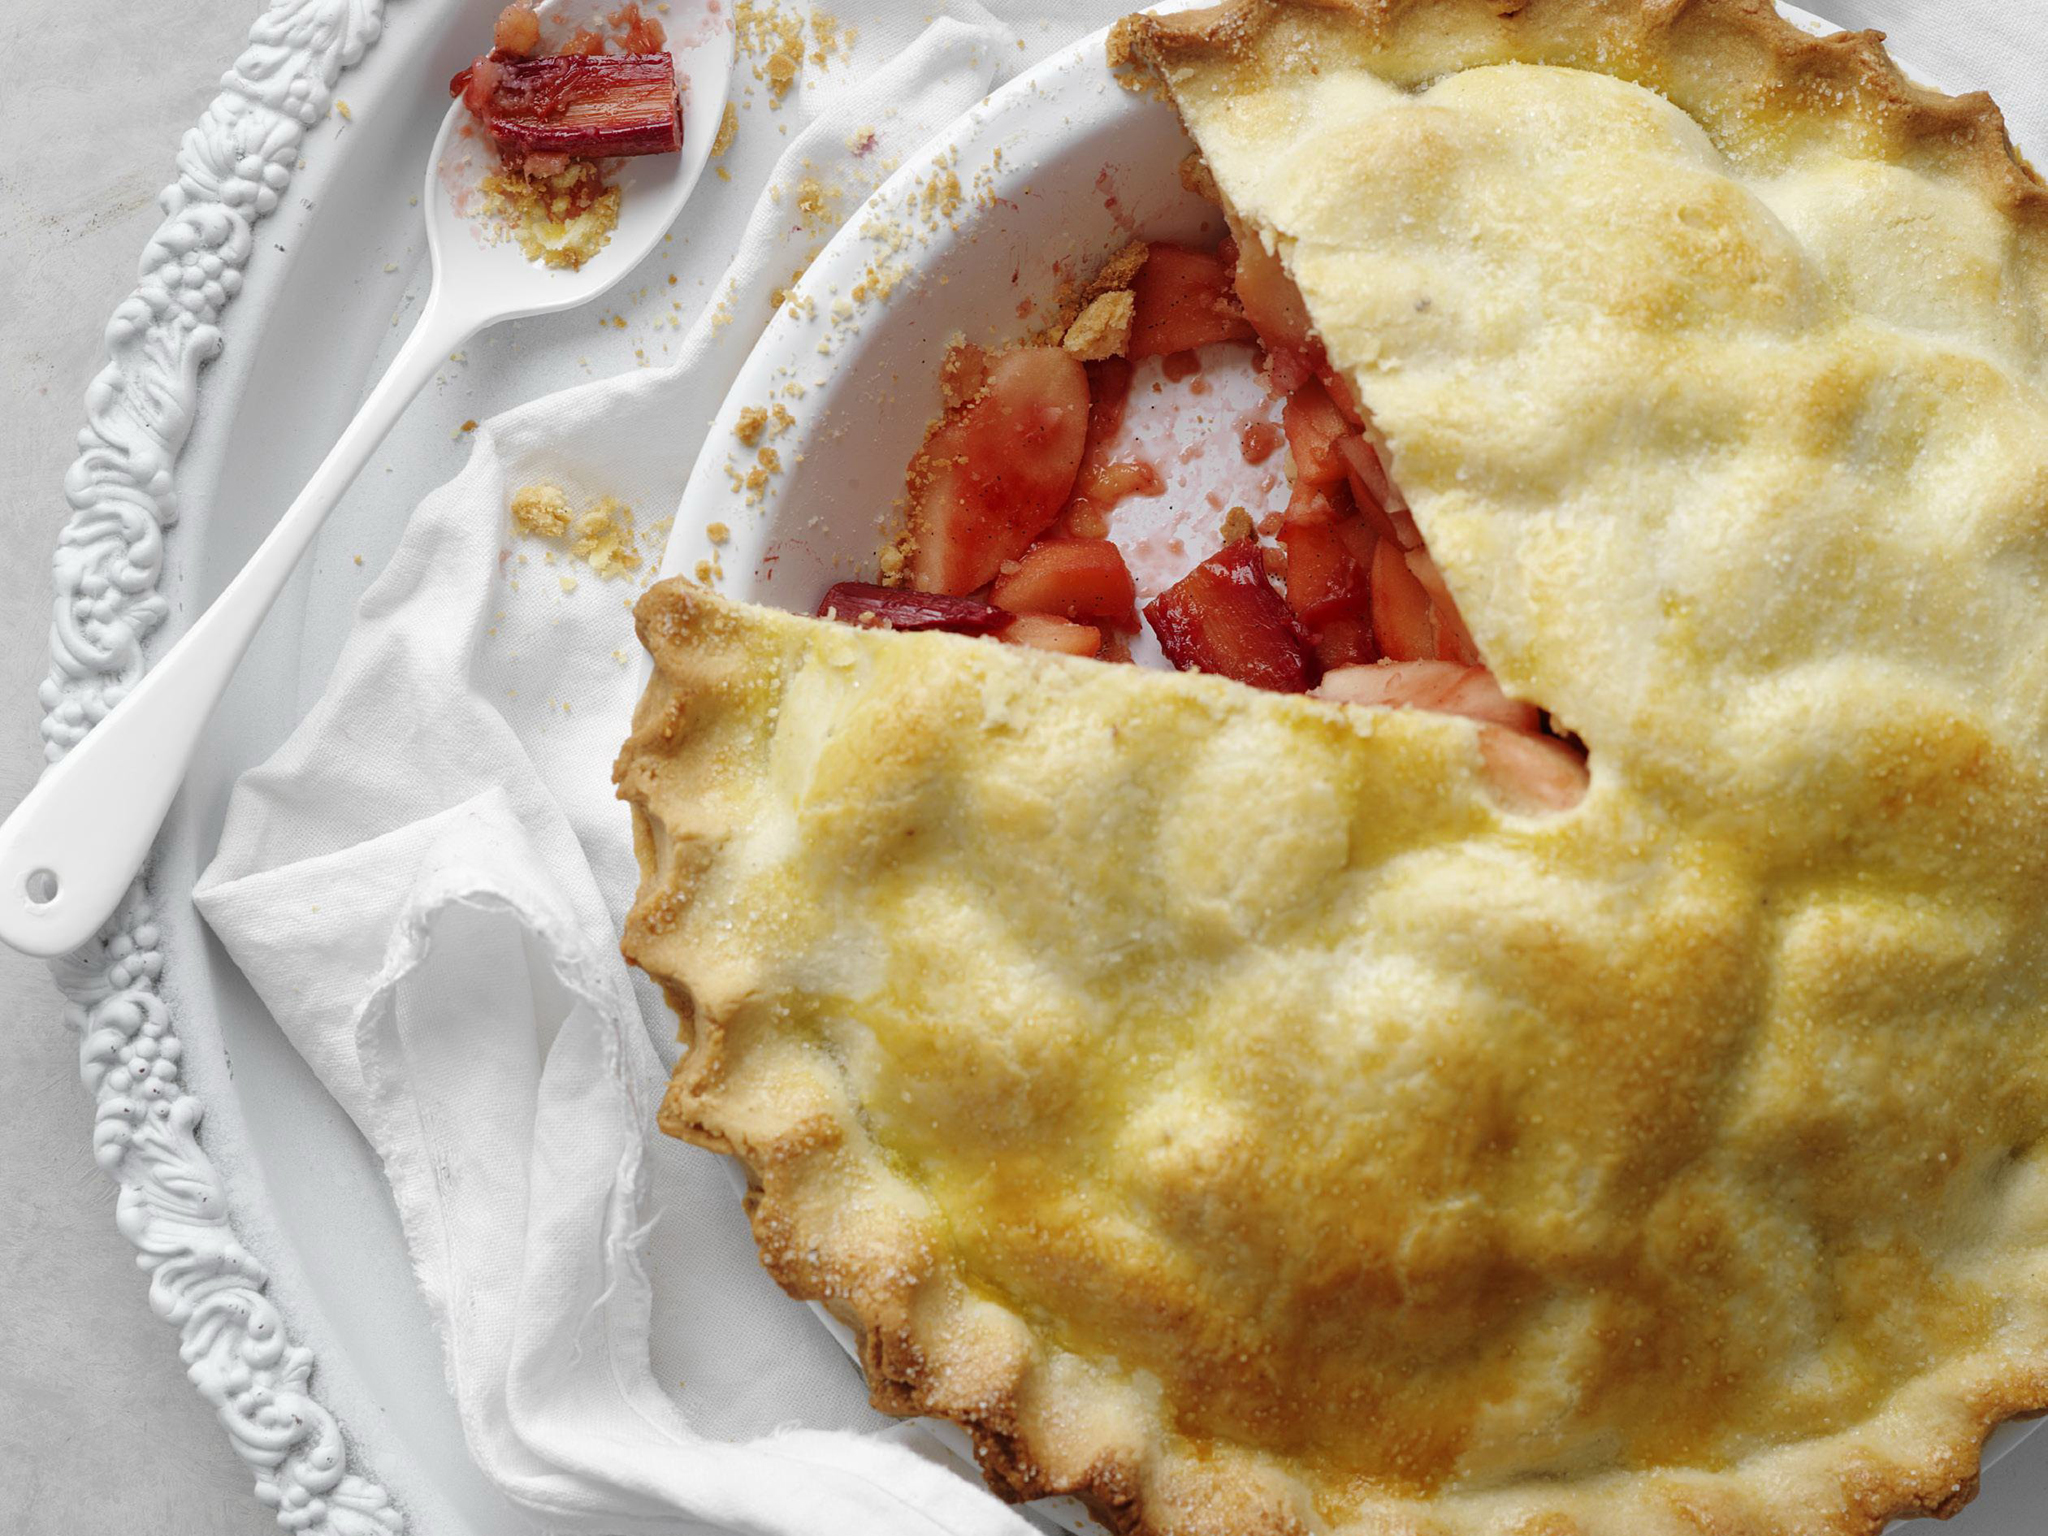 OLD-FASHIONED Apple and Rhubarb Pie